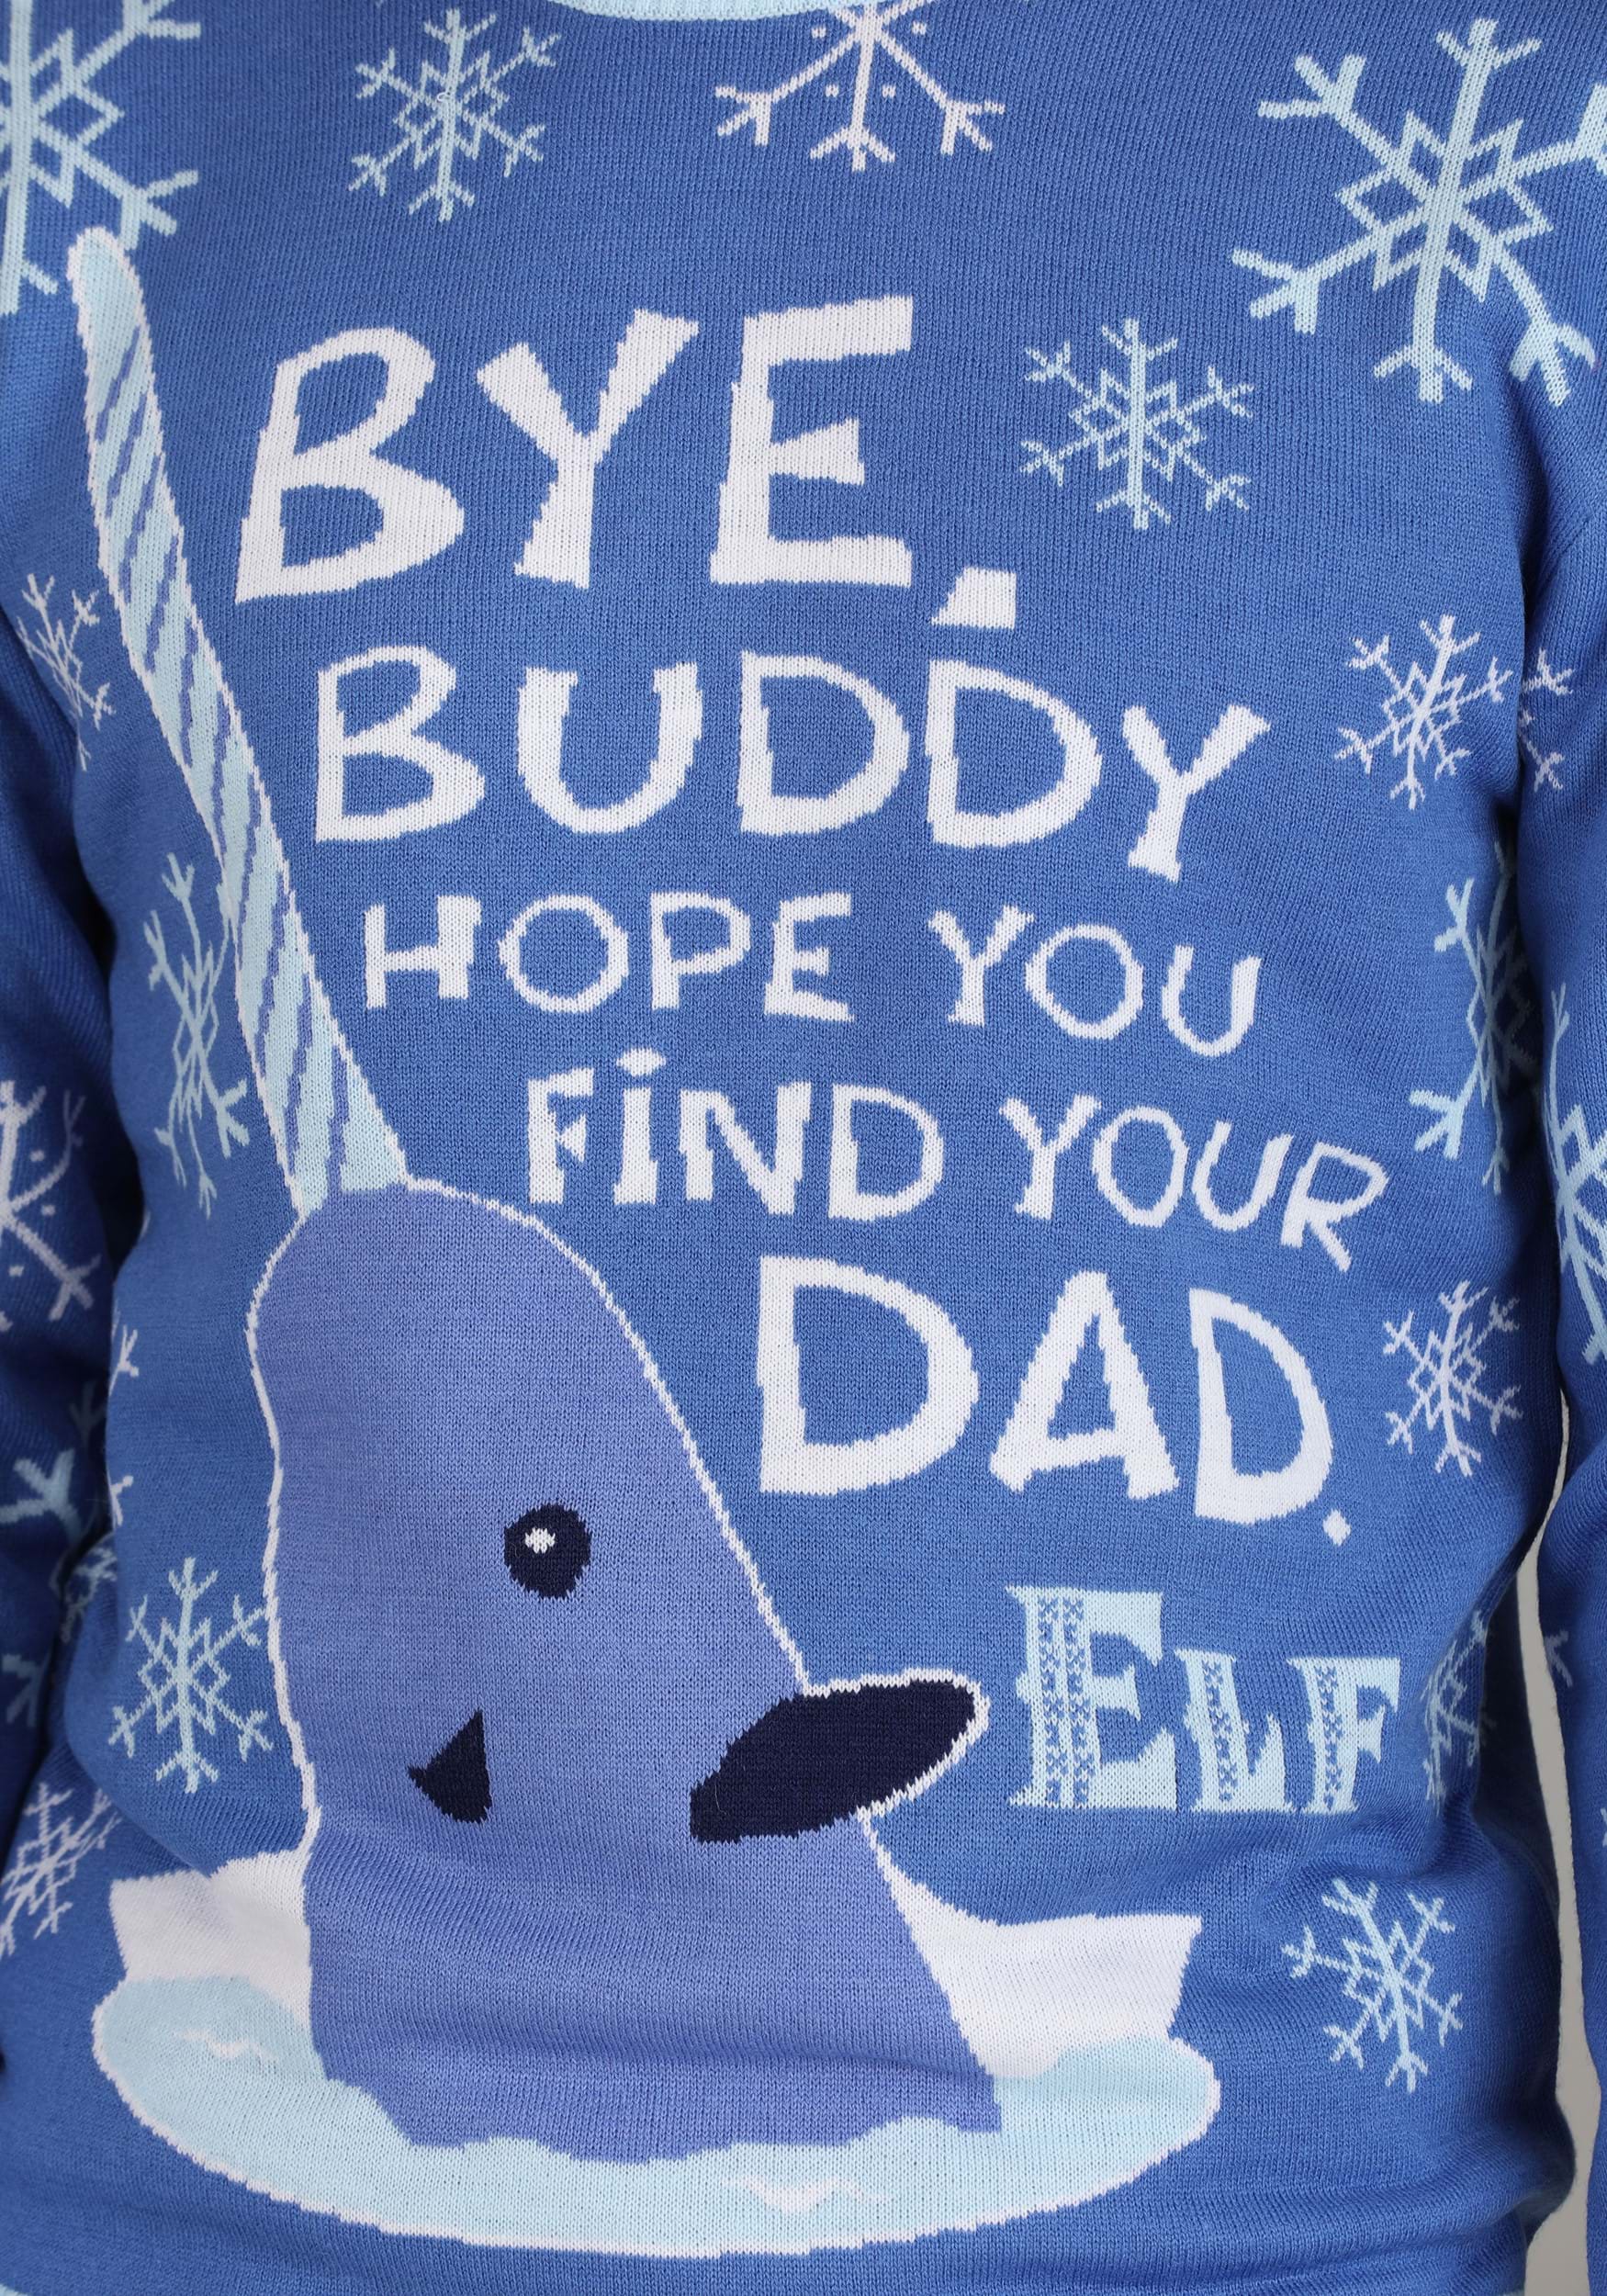 ELF MR. NARWHAL “BYE BUDDY HOPE YOU FIND YOUR DAD” CHRISTMAS T-SHIRT XL  Youth